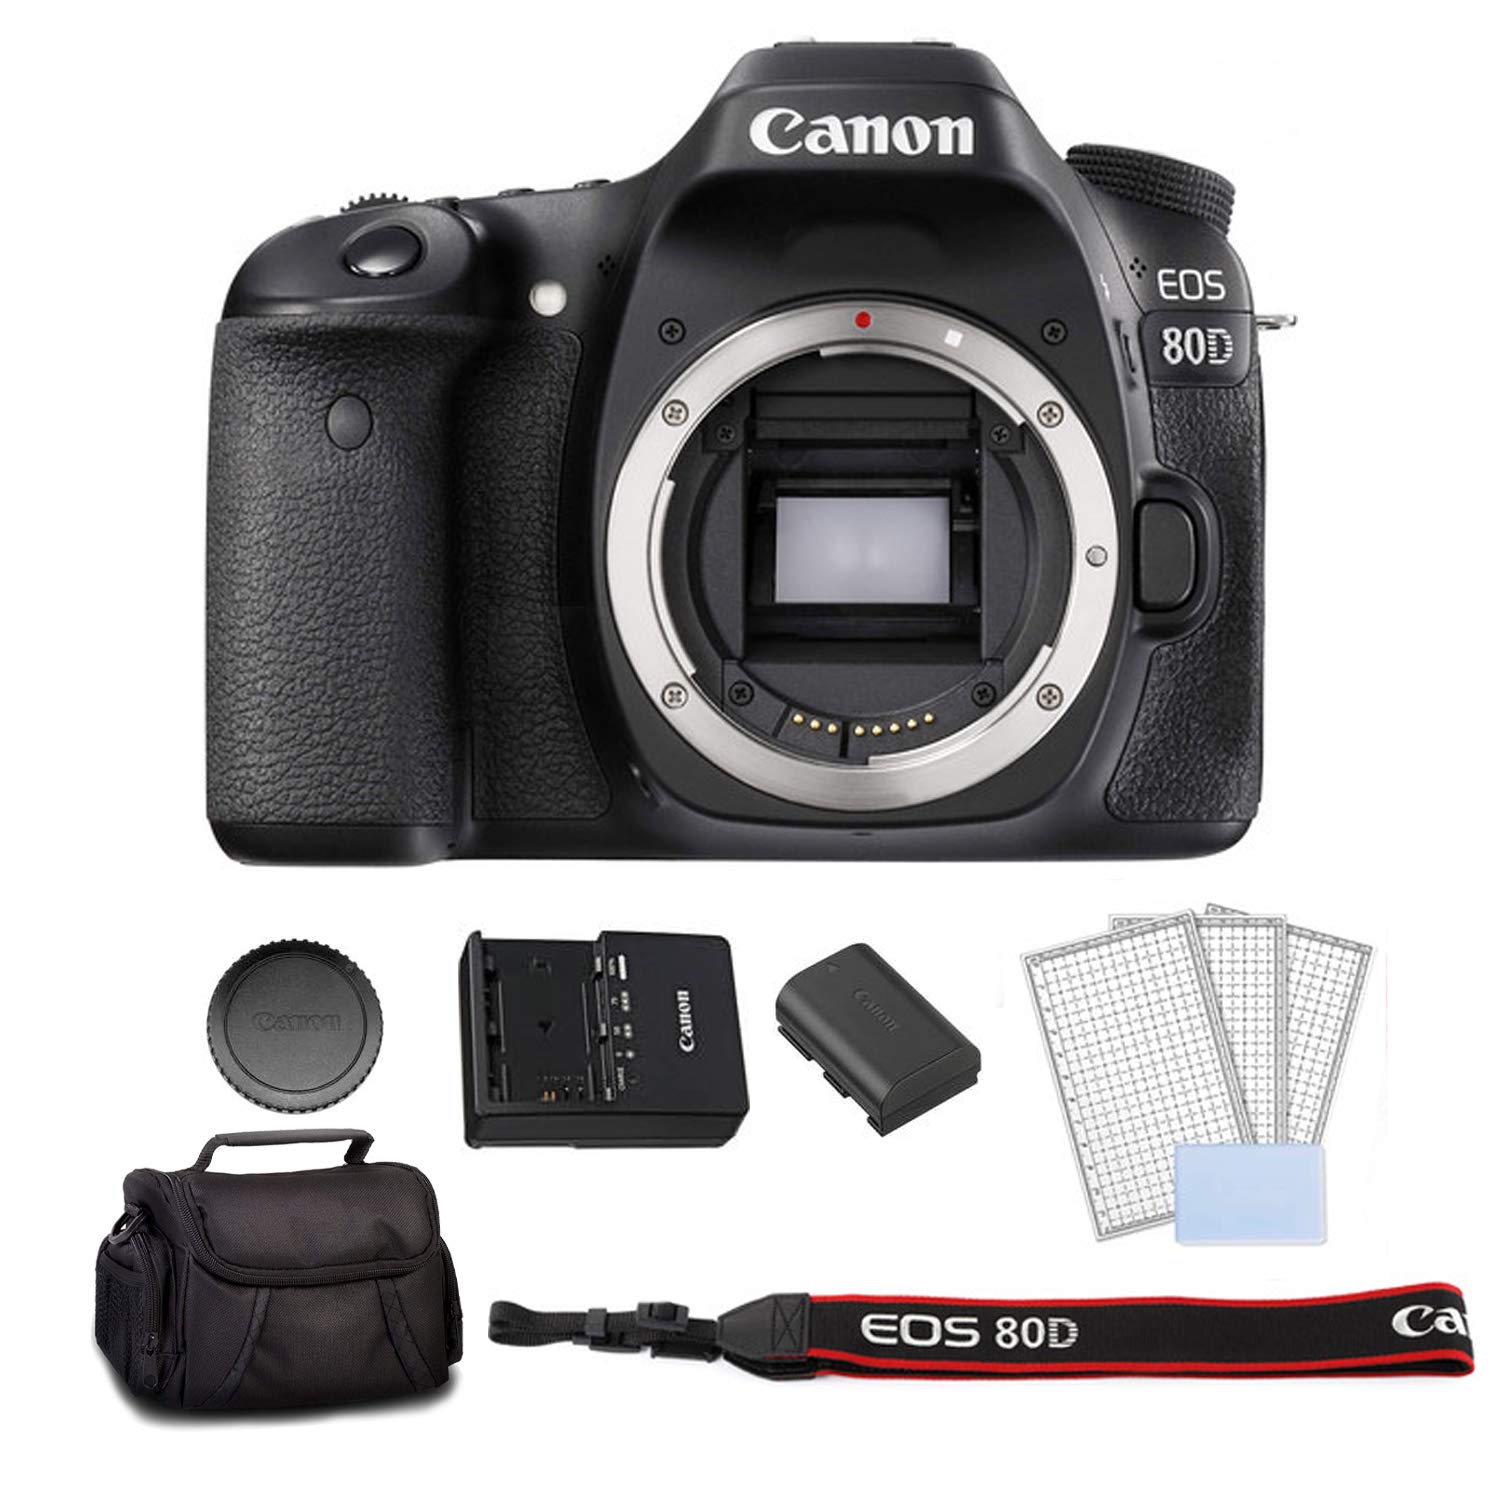 Canon EOS 80D DSLR Camera (Body Only) Bundle Kit with Carrying Bag + LCD Screen Protectors - International Model